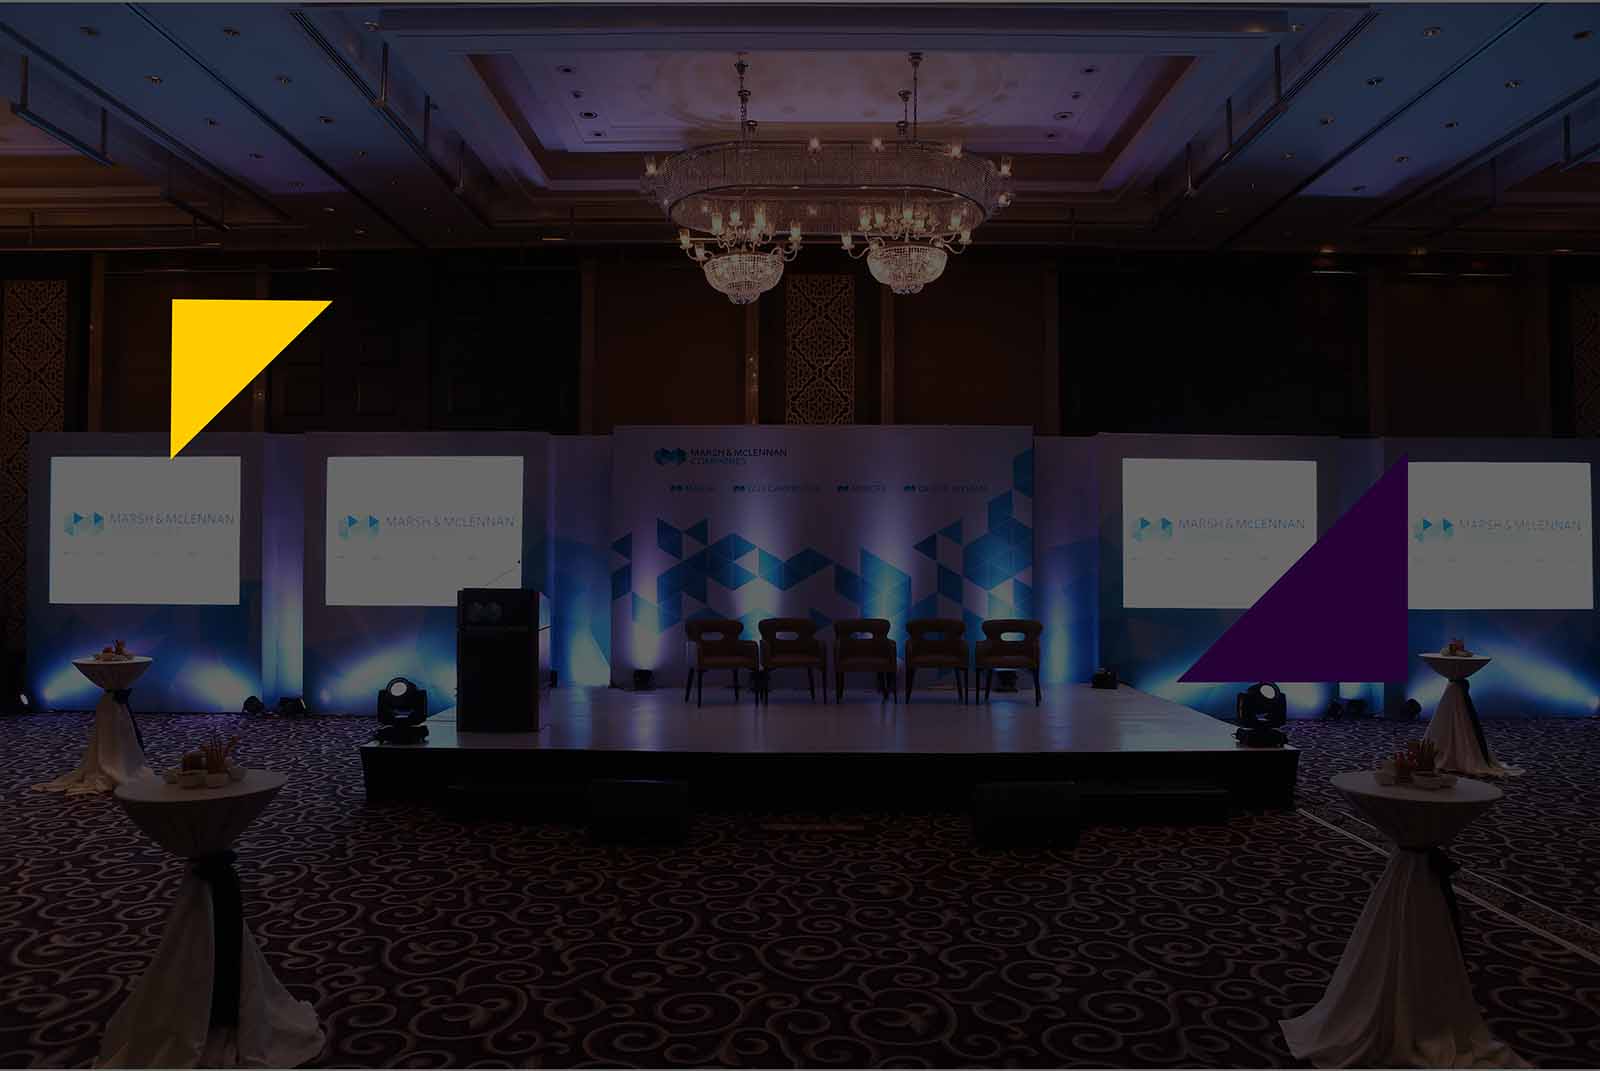 Header Image 3 of the Home Page corporate event planning company Pegasus Events Pvt Ltd website